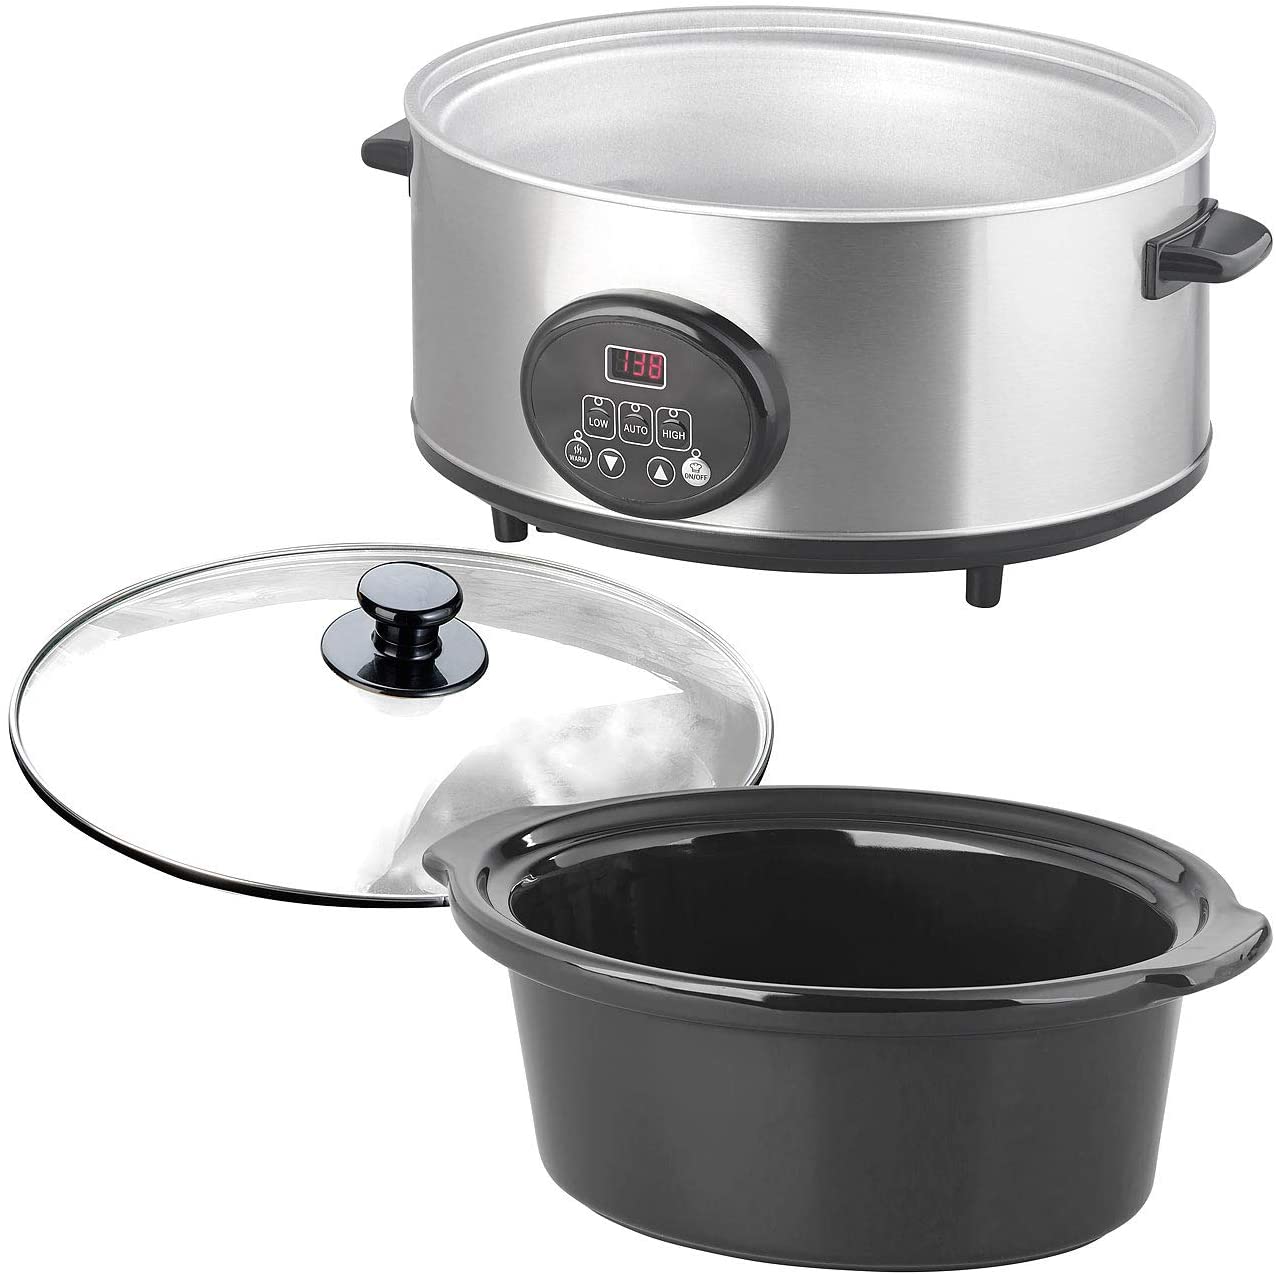 Rosenstein & Söhne Ceramic pot: slow cooker with ceramic insert 4.5 l, 2 temperatures, keep warm, 280 W (electric slow cooker)